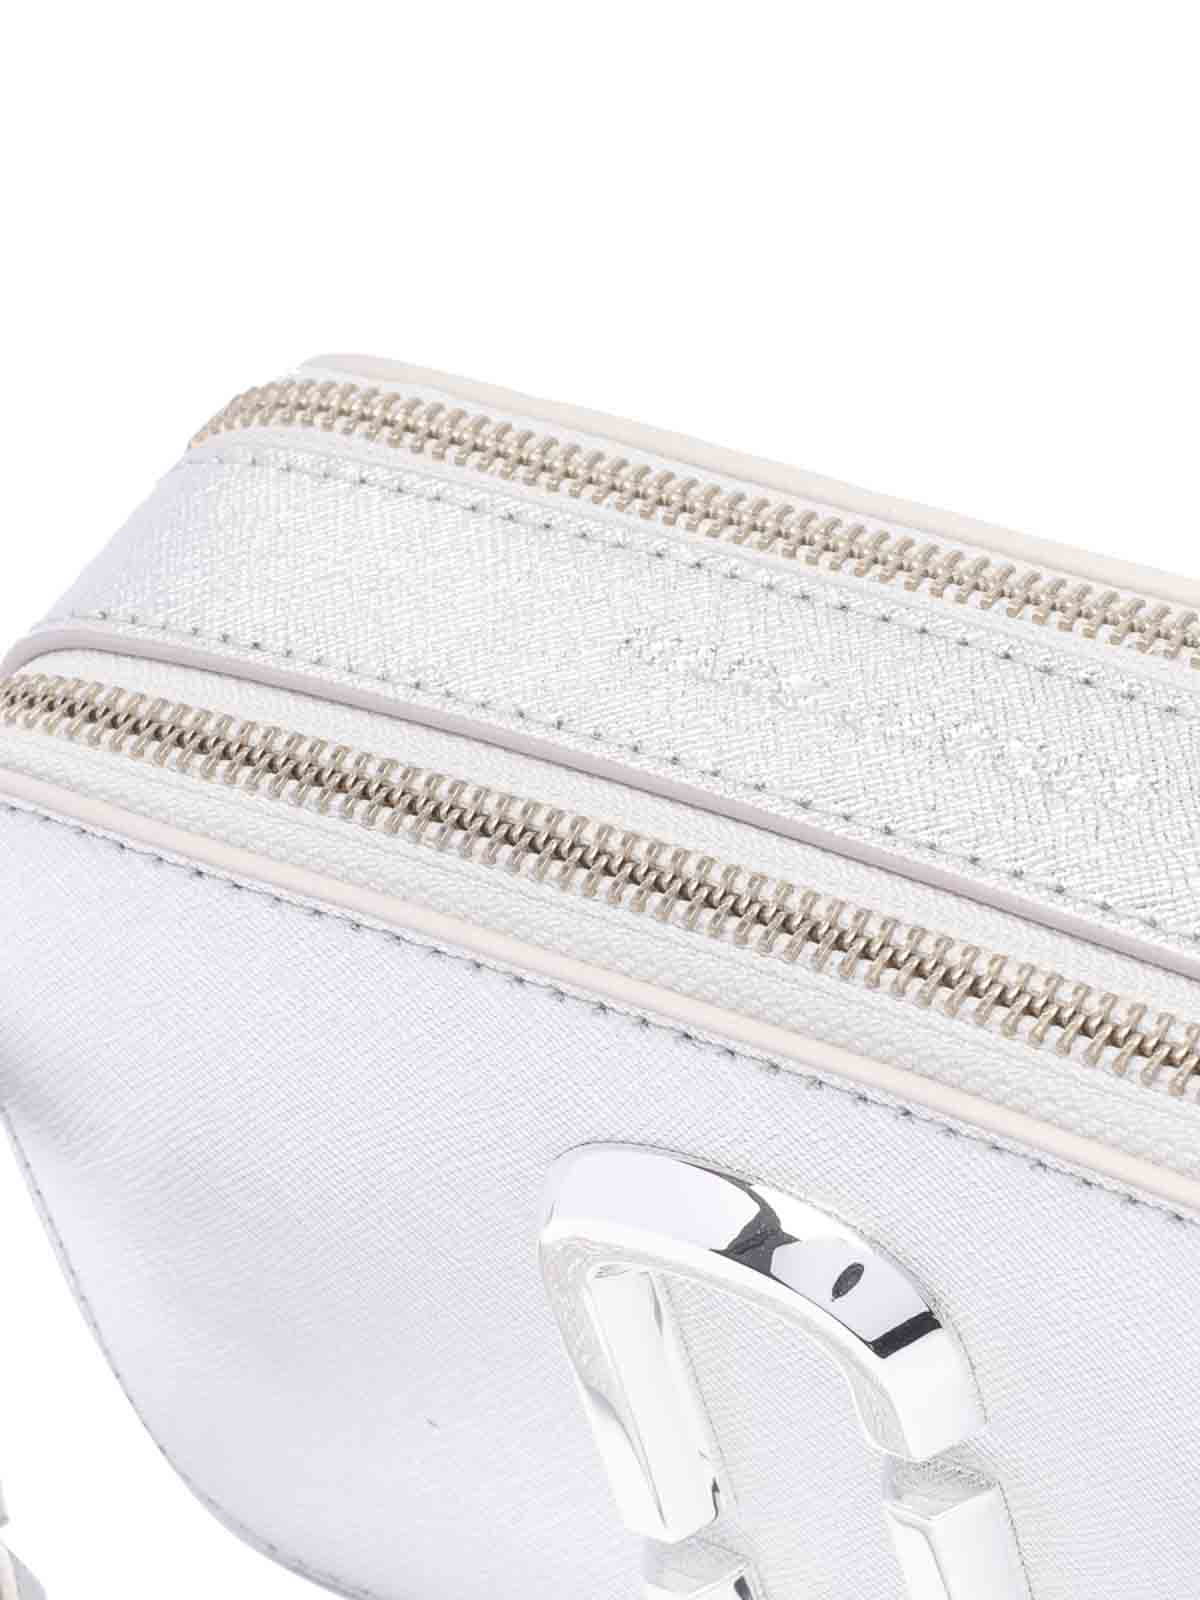 Shop Marc Jacobs The Snapshot Crossbody Bag In Silver